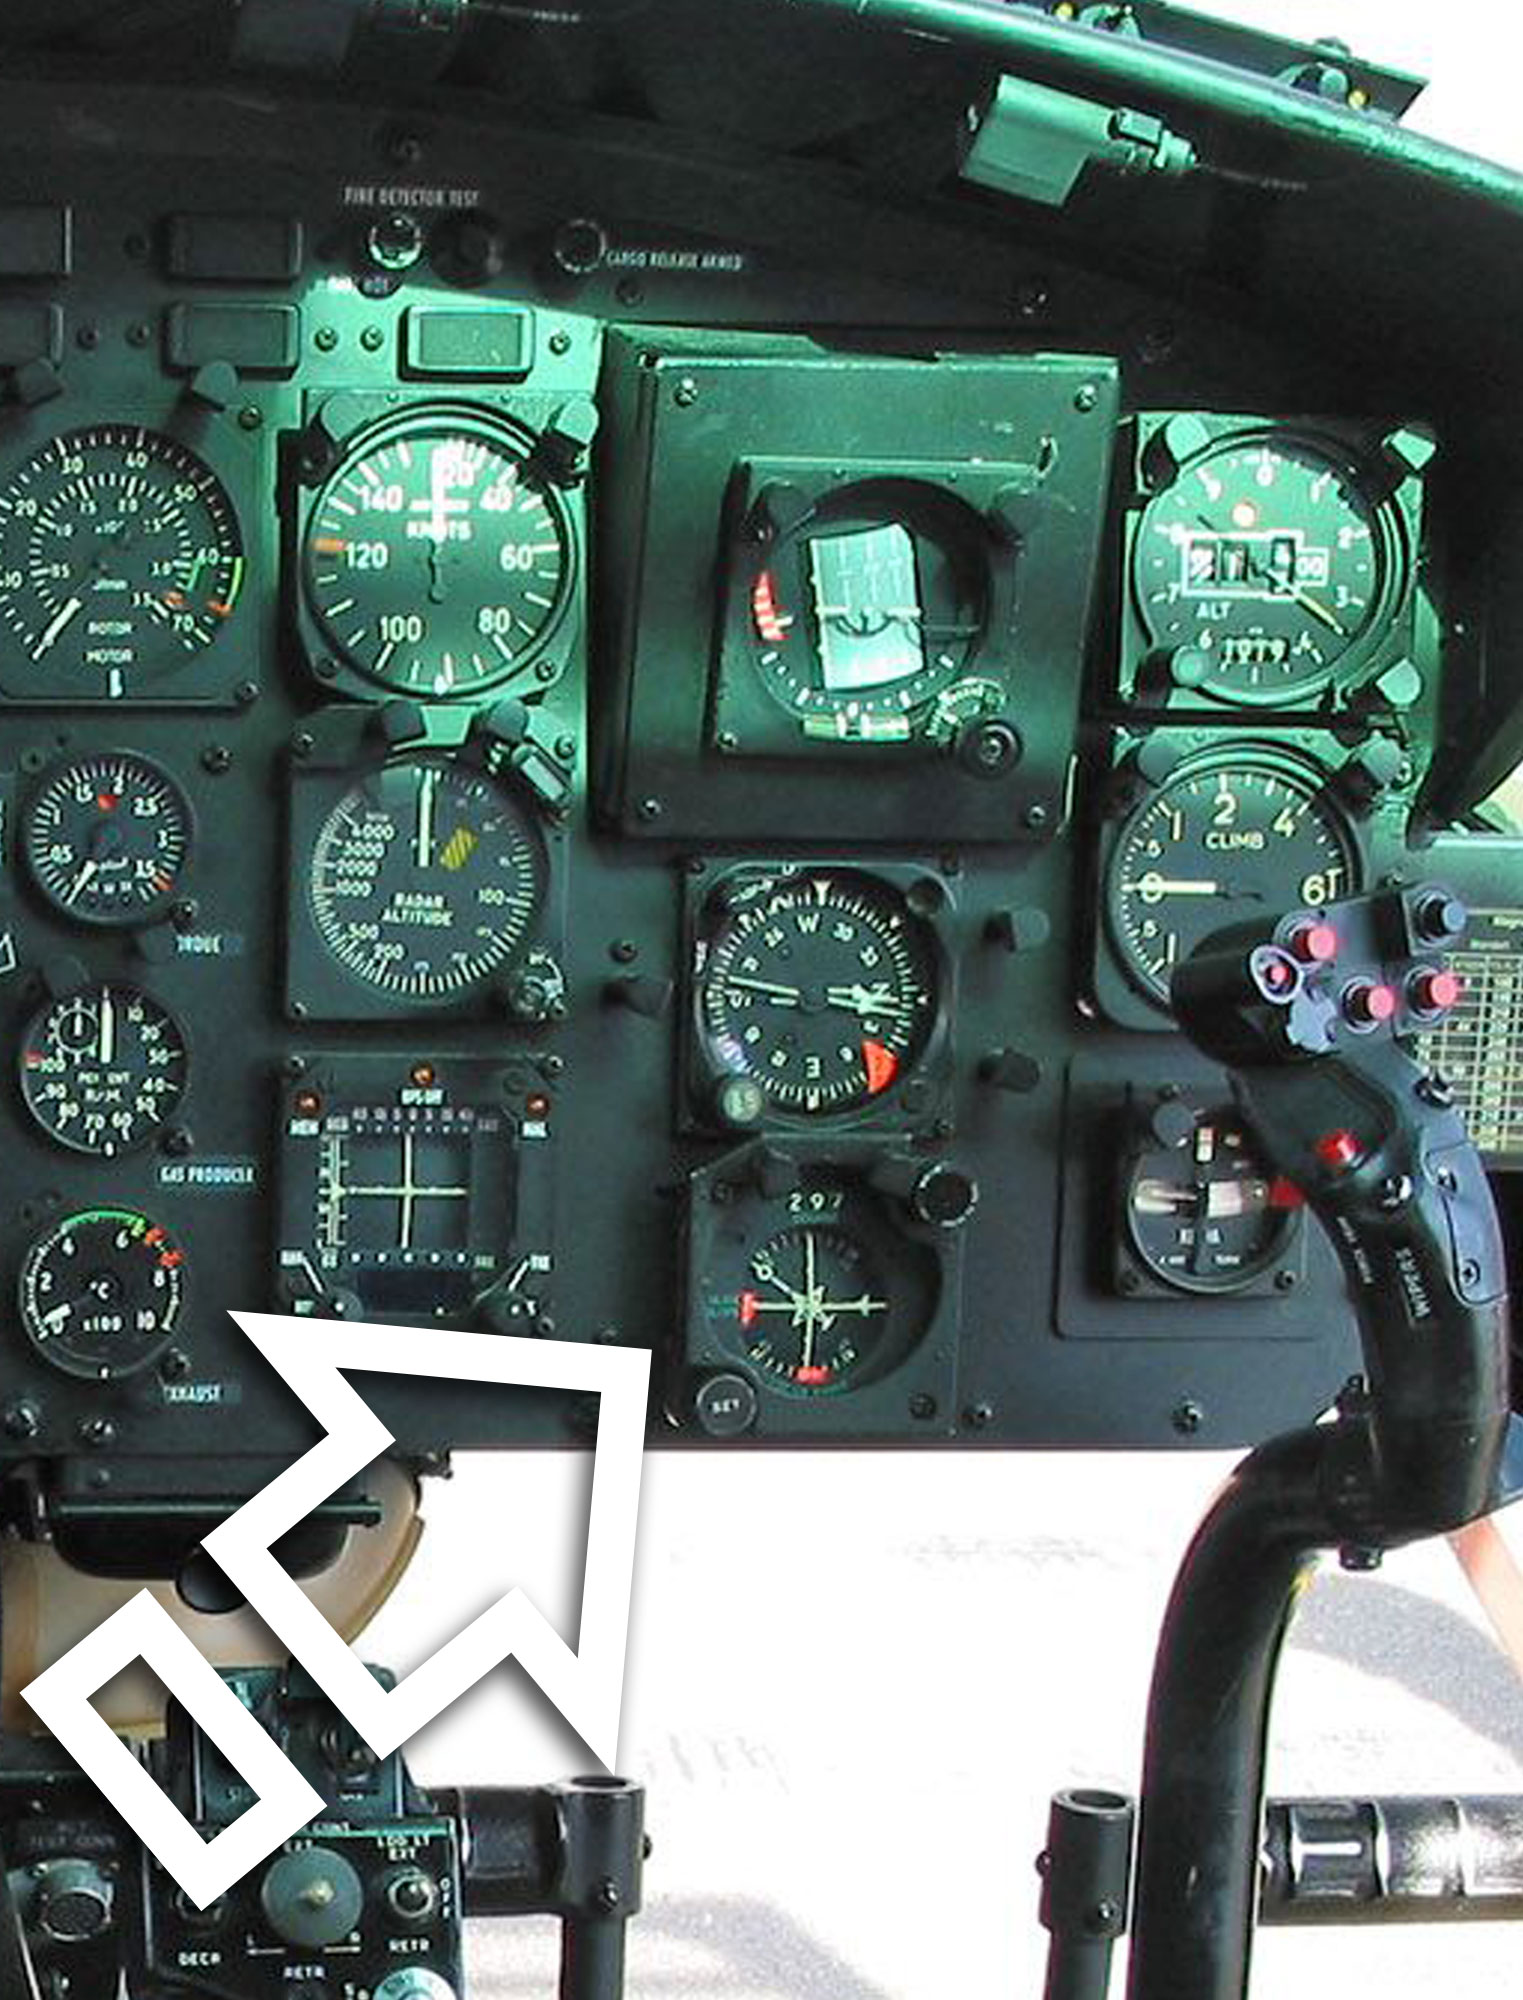 BELL HUEY UH-1 MN-97 OMNI-MAG COURSE INDICATOR